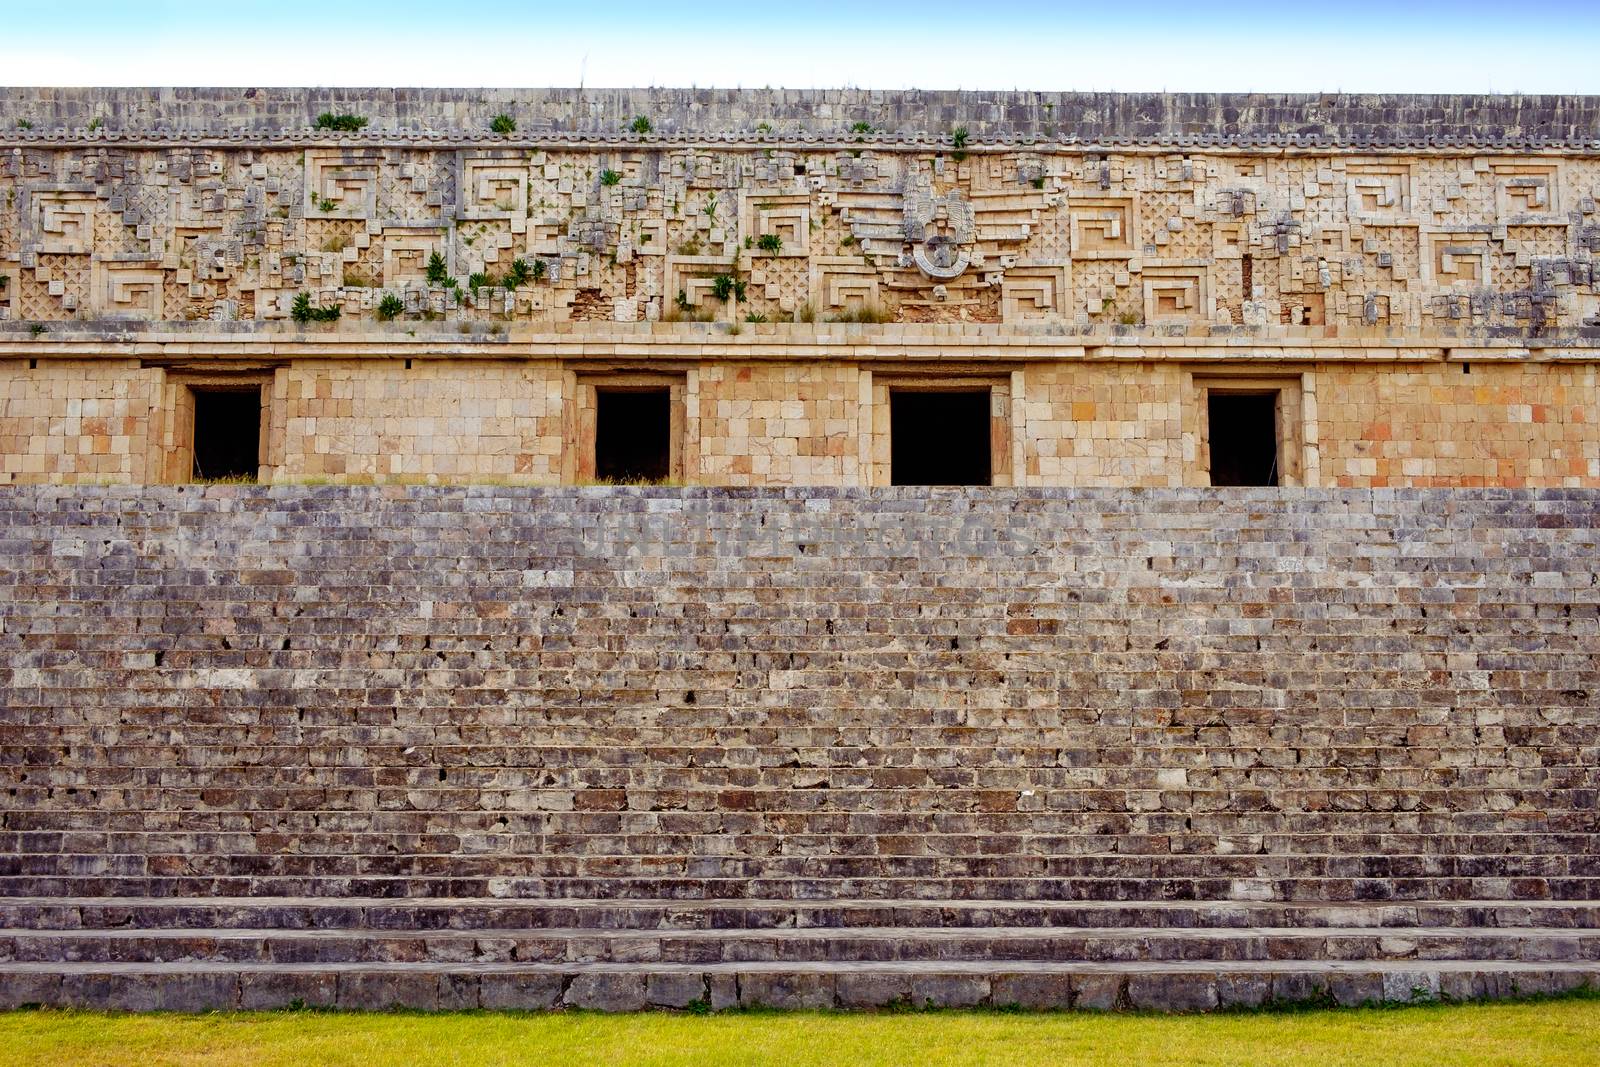 Detail view of ancient decorated wall and stairs in archeological site Uxmal, Mexico